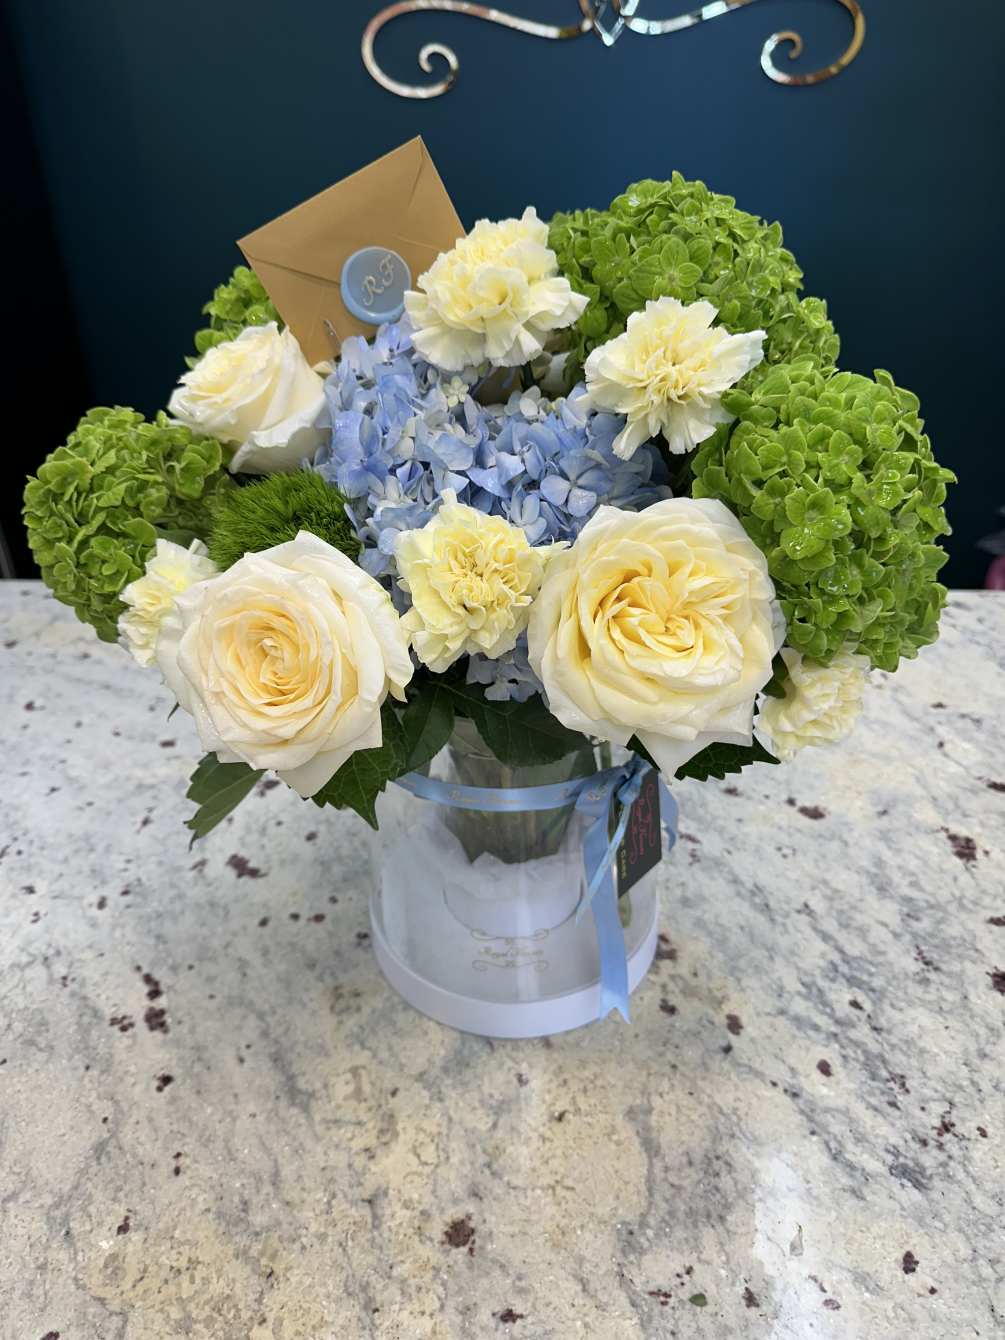 Stunning bouquet with fresh Candlelight roses, green and blue hydrangeas, carnations and